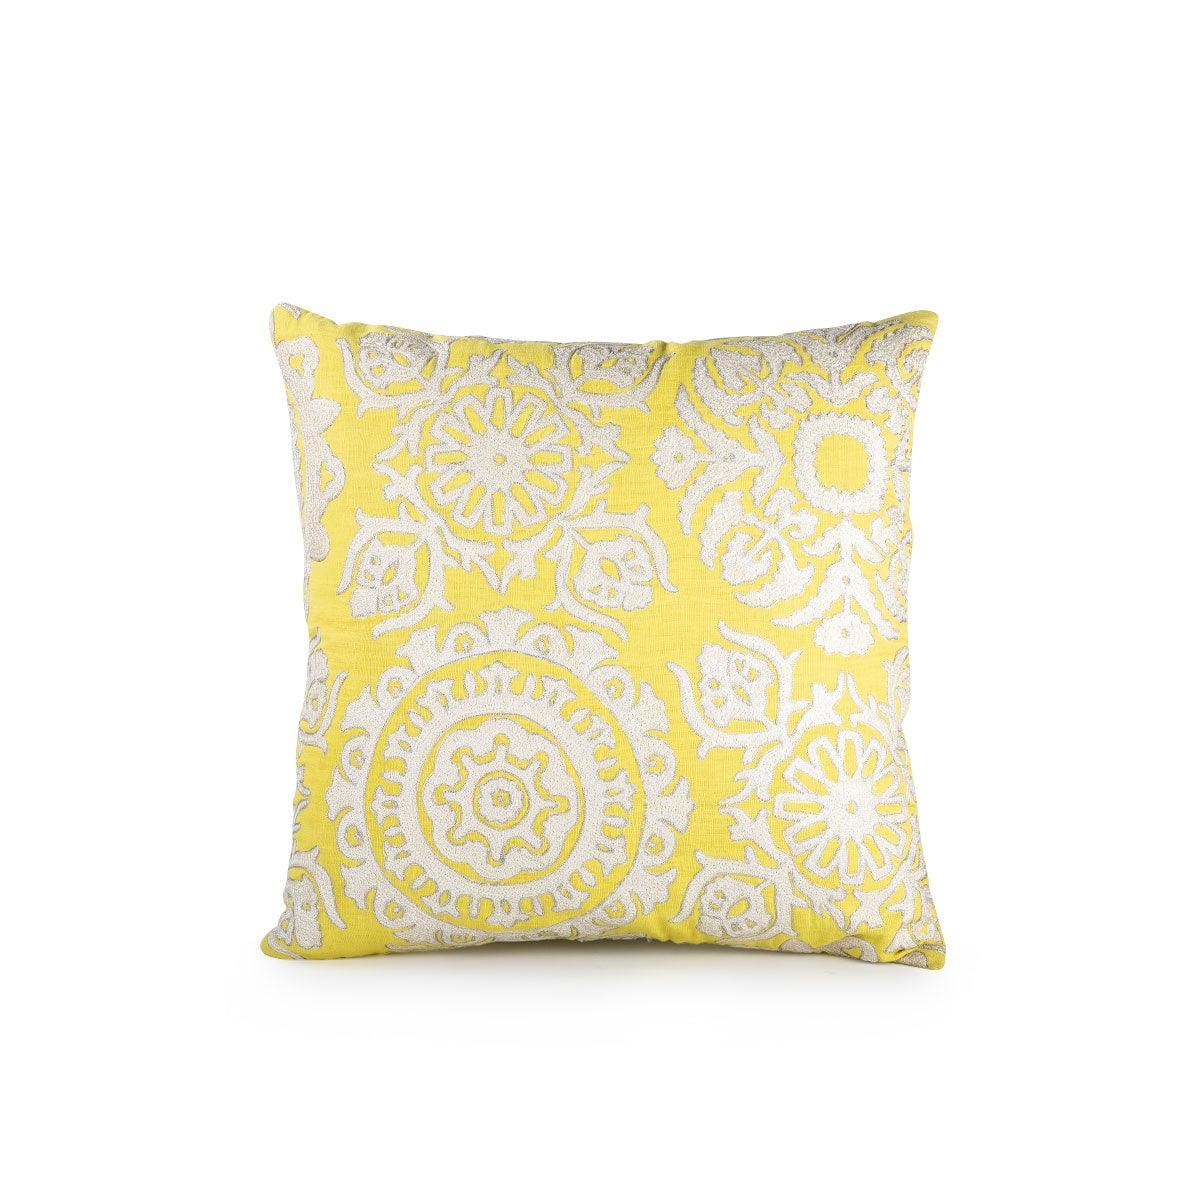 Pashto 20 In X 20 In Yellow Cushion Cover - Home4u